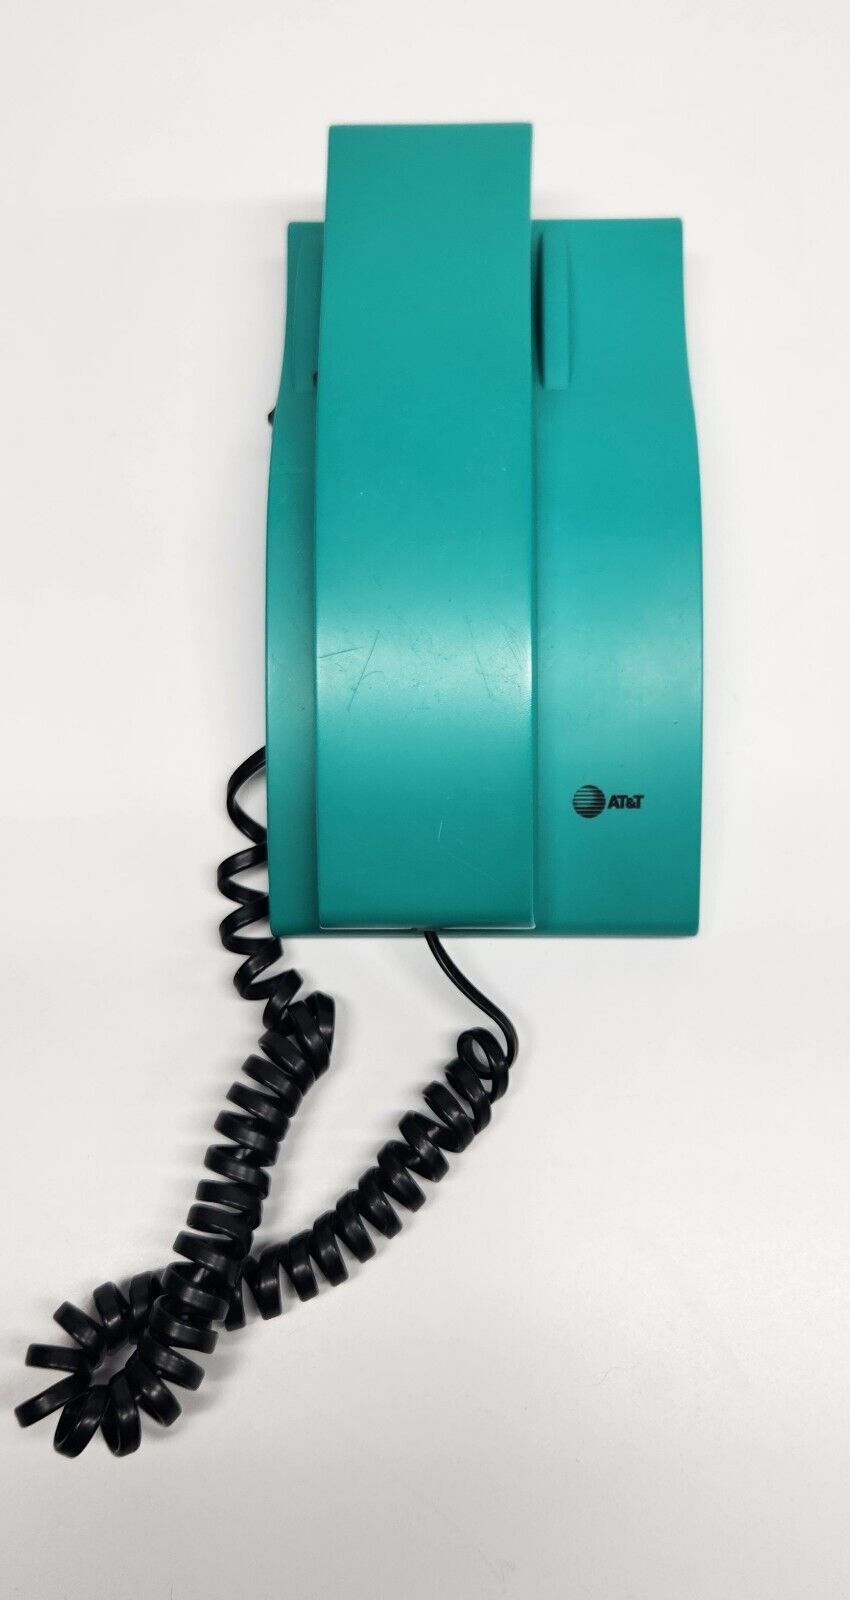 VINTAGE EARLY 90s AT&T TEAL TOUCH TONE OR PULSE DESK TOP TELEPHONE